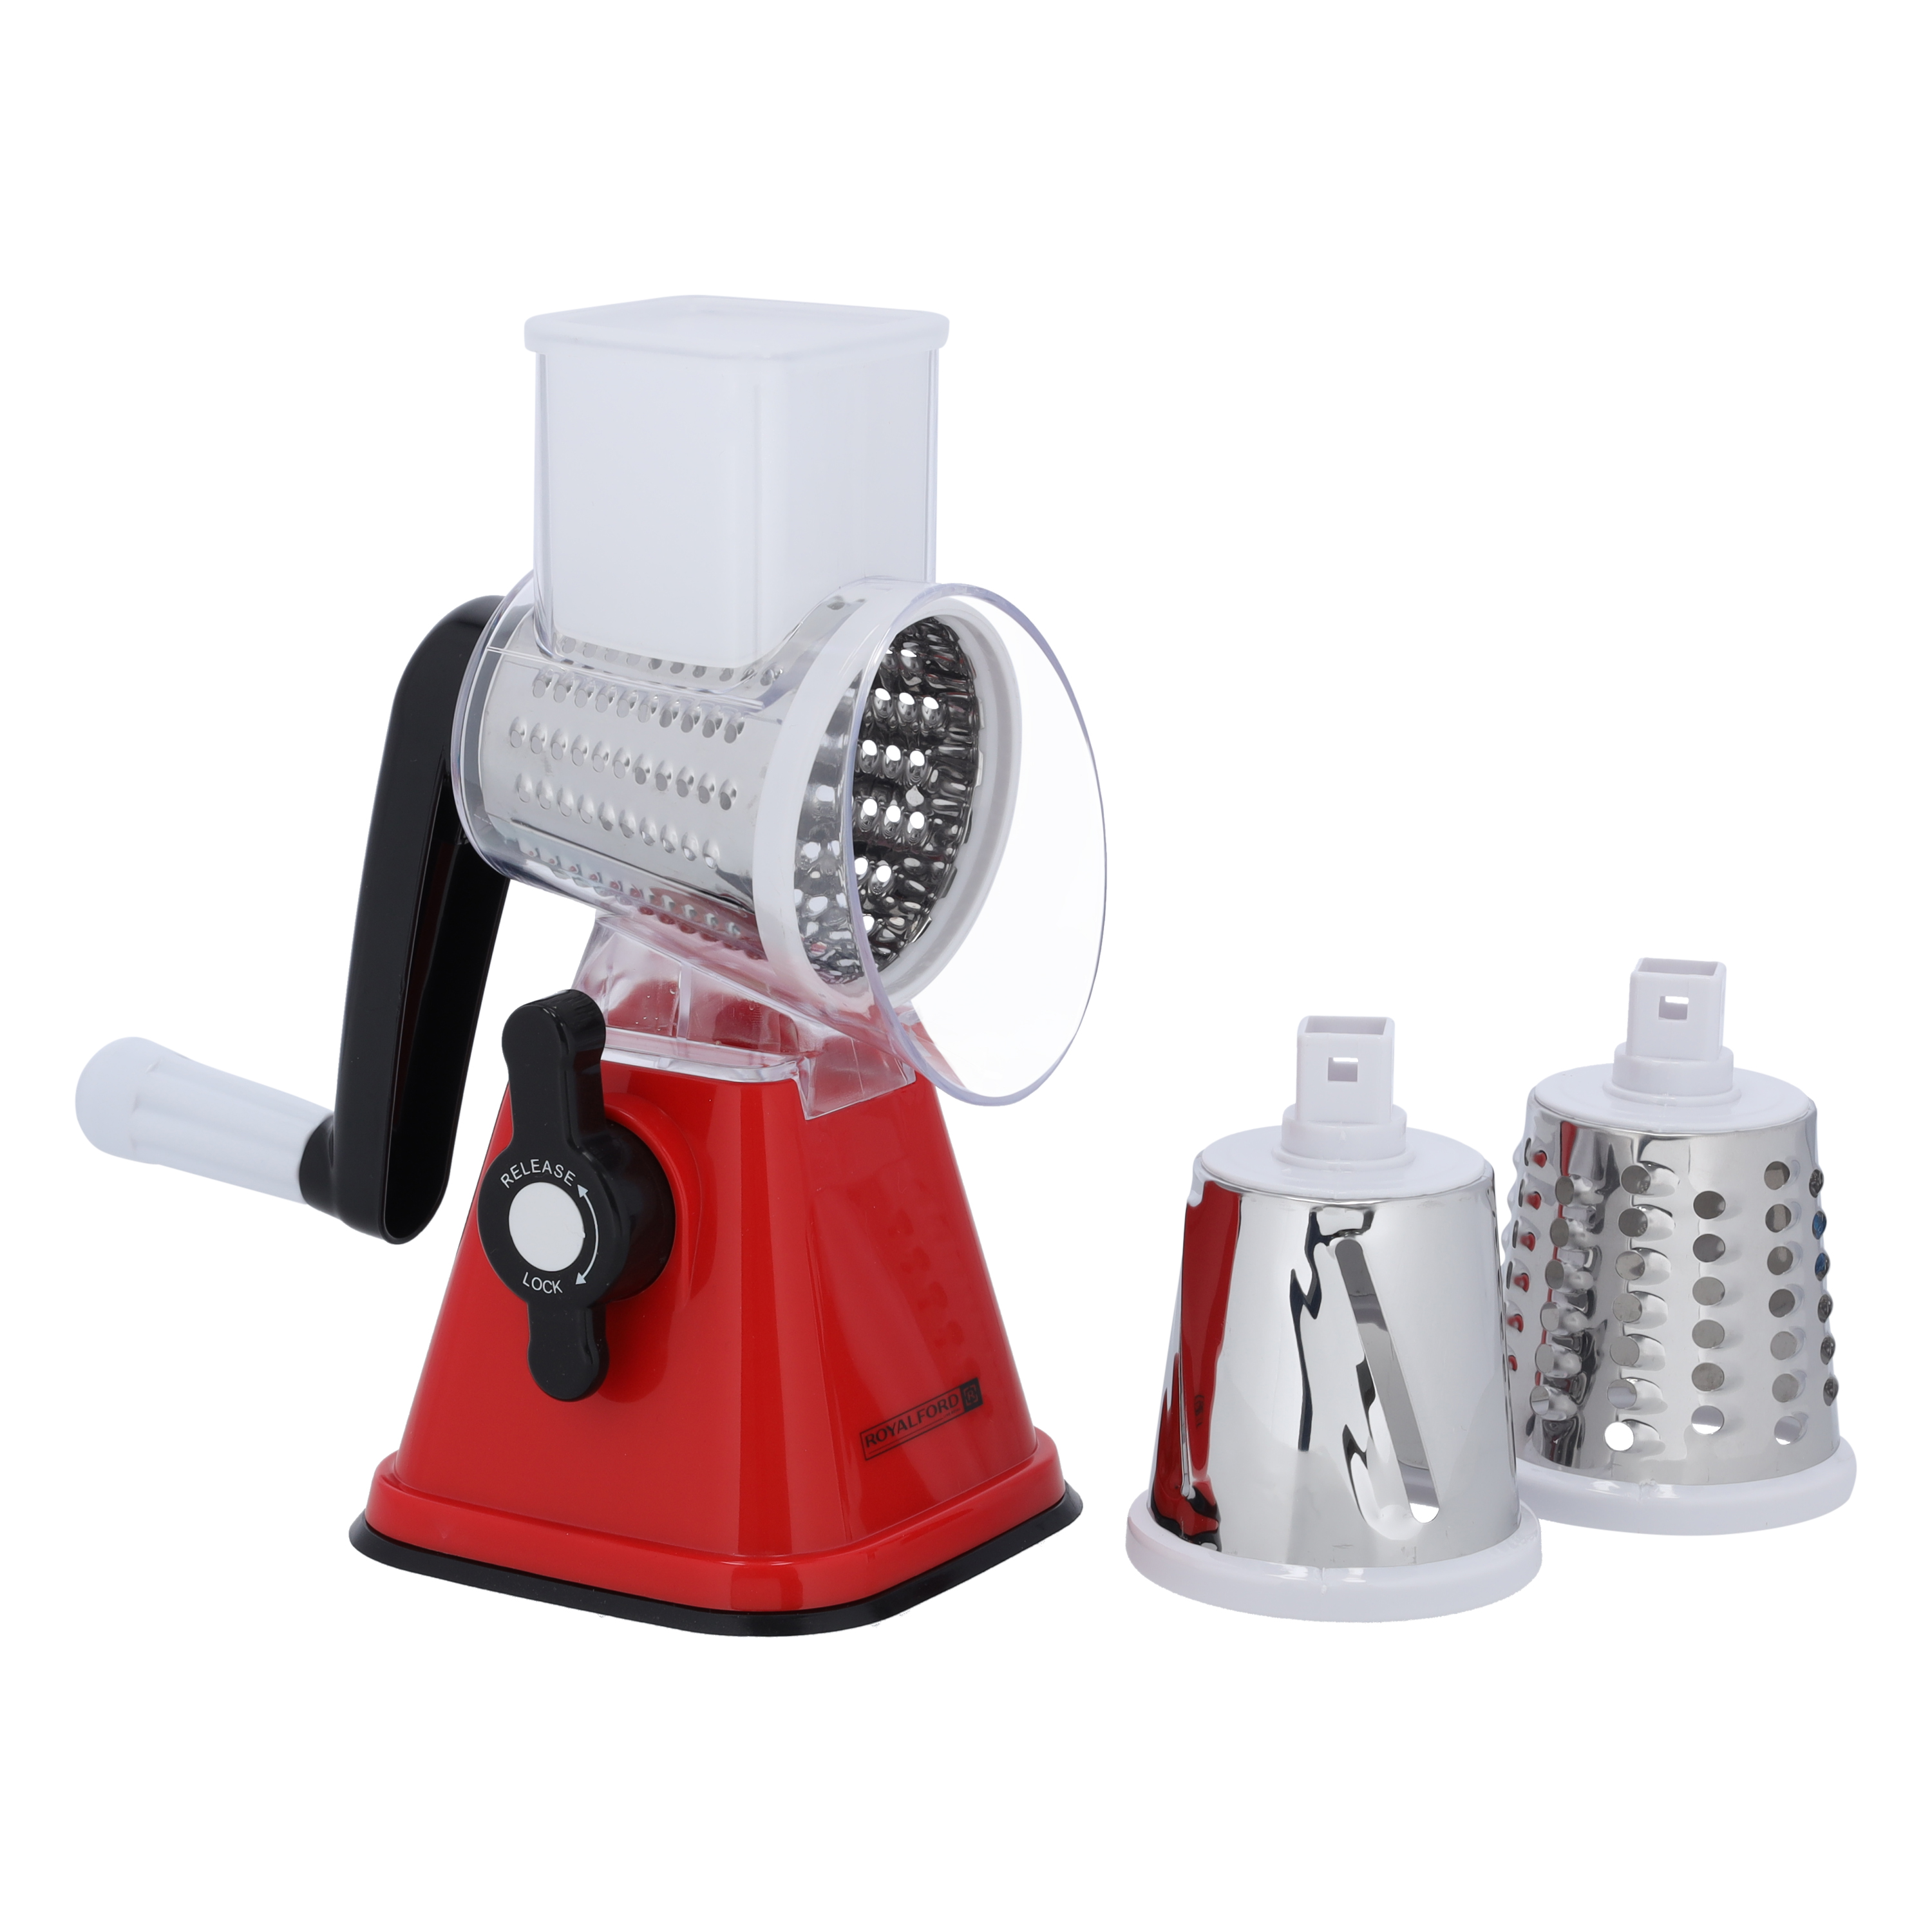 World-cuisine 48295-10 Grater Automatic